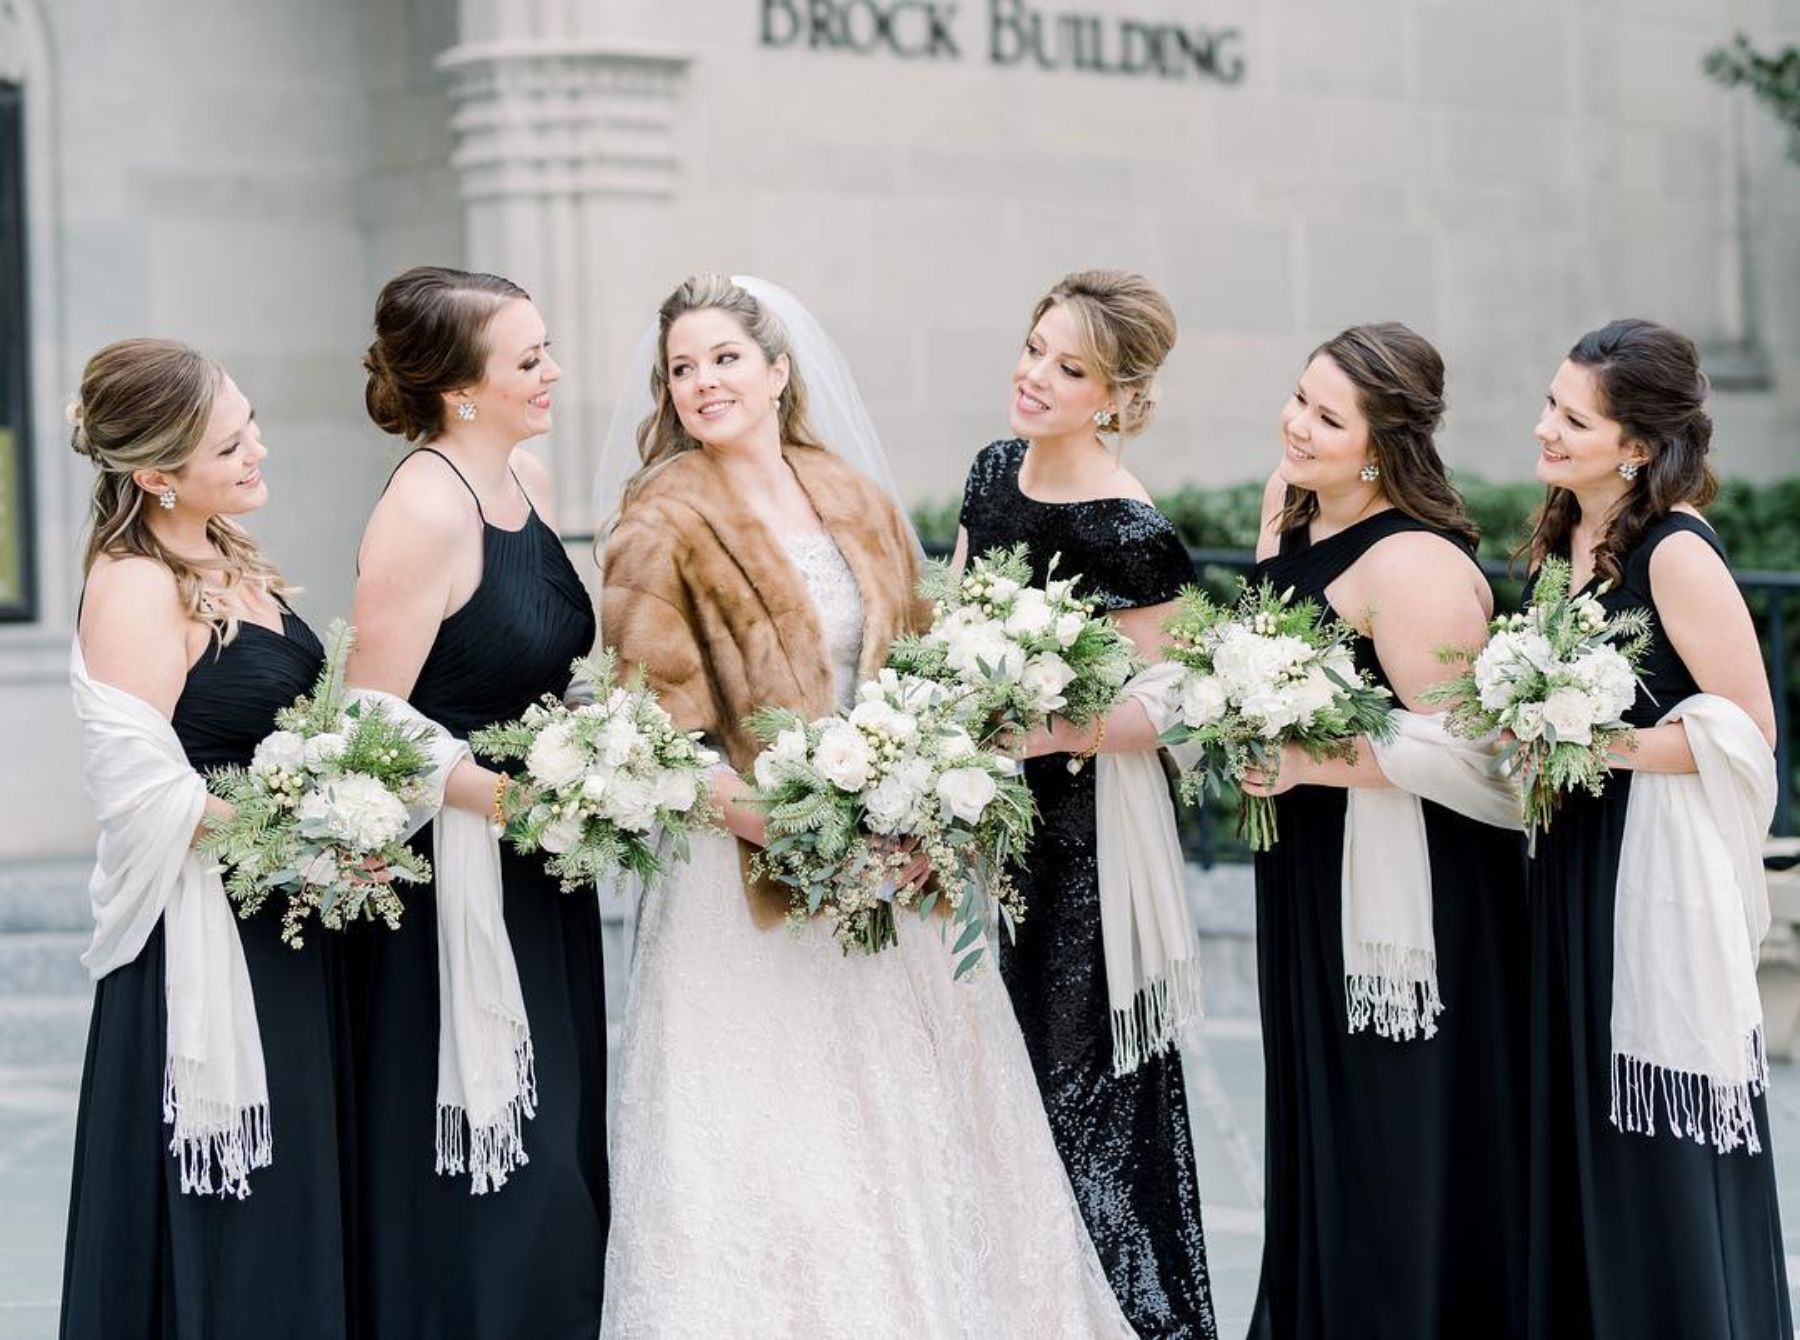 Bride and bridal party holding bouquets